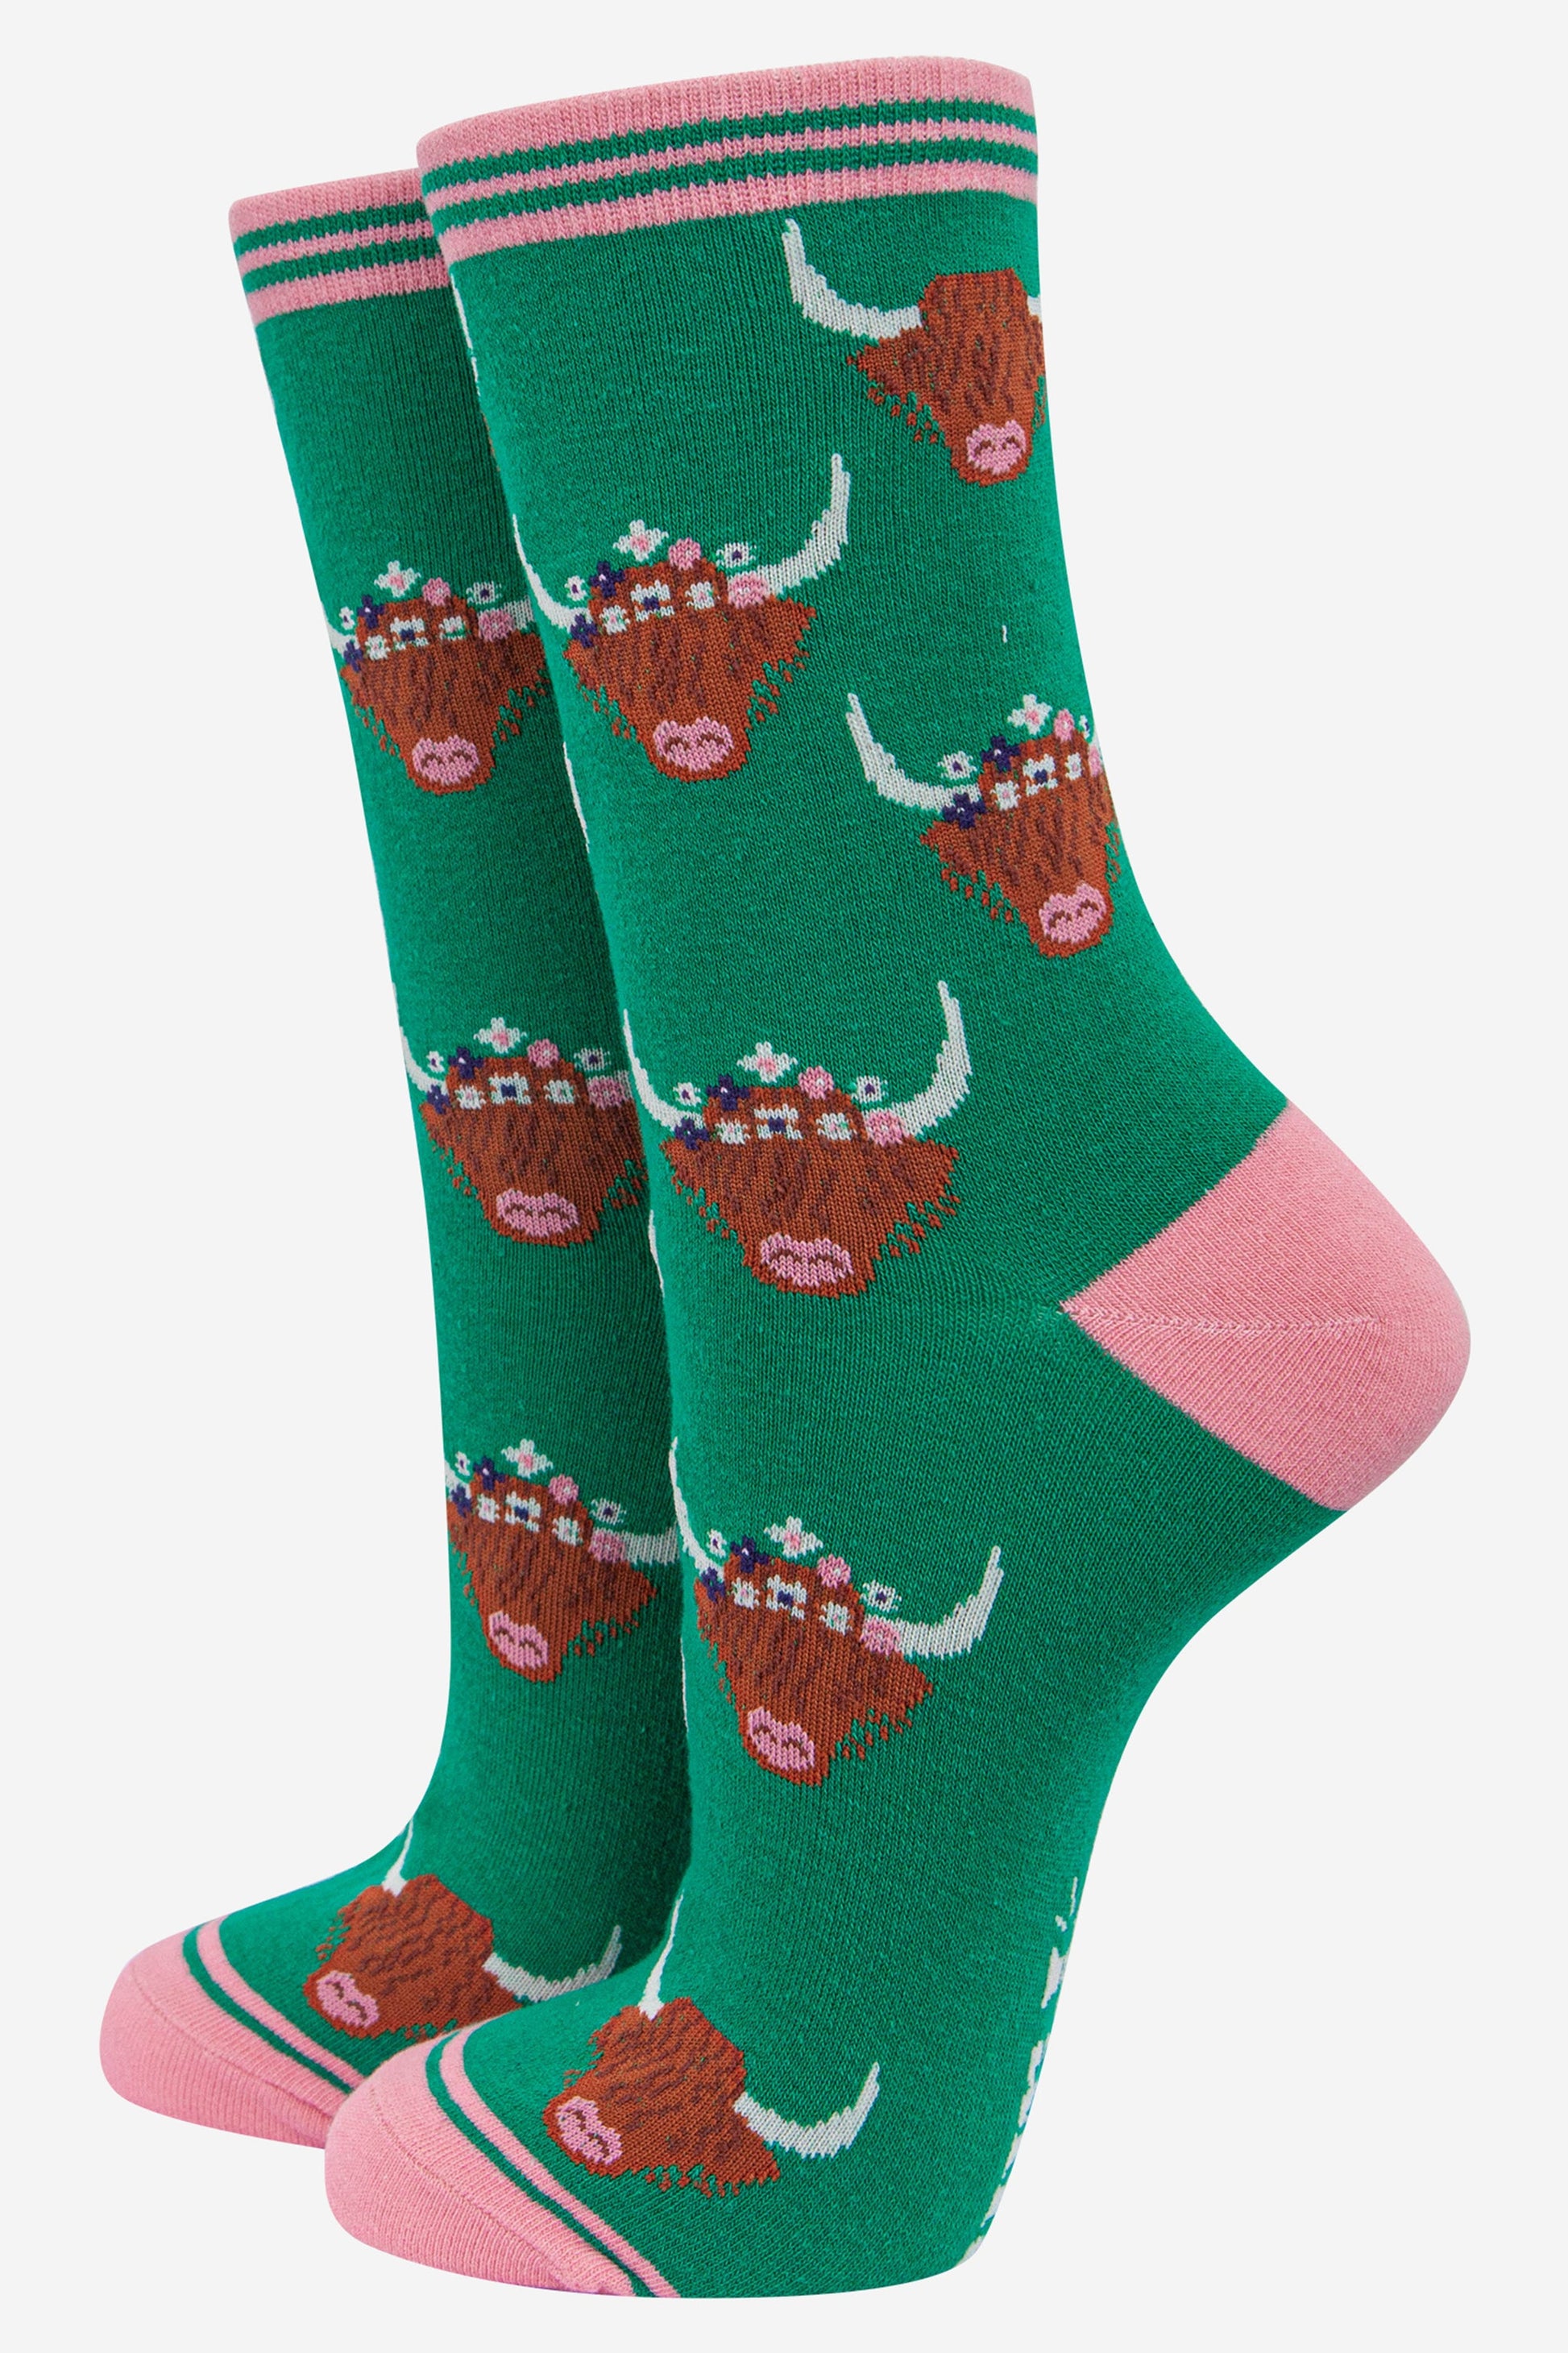 green ankle socks with pink toe, heel and cuff featuring a pattern of brown highland cow faces wearing multicoloured floral wreaths